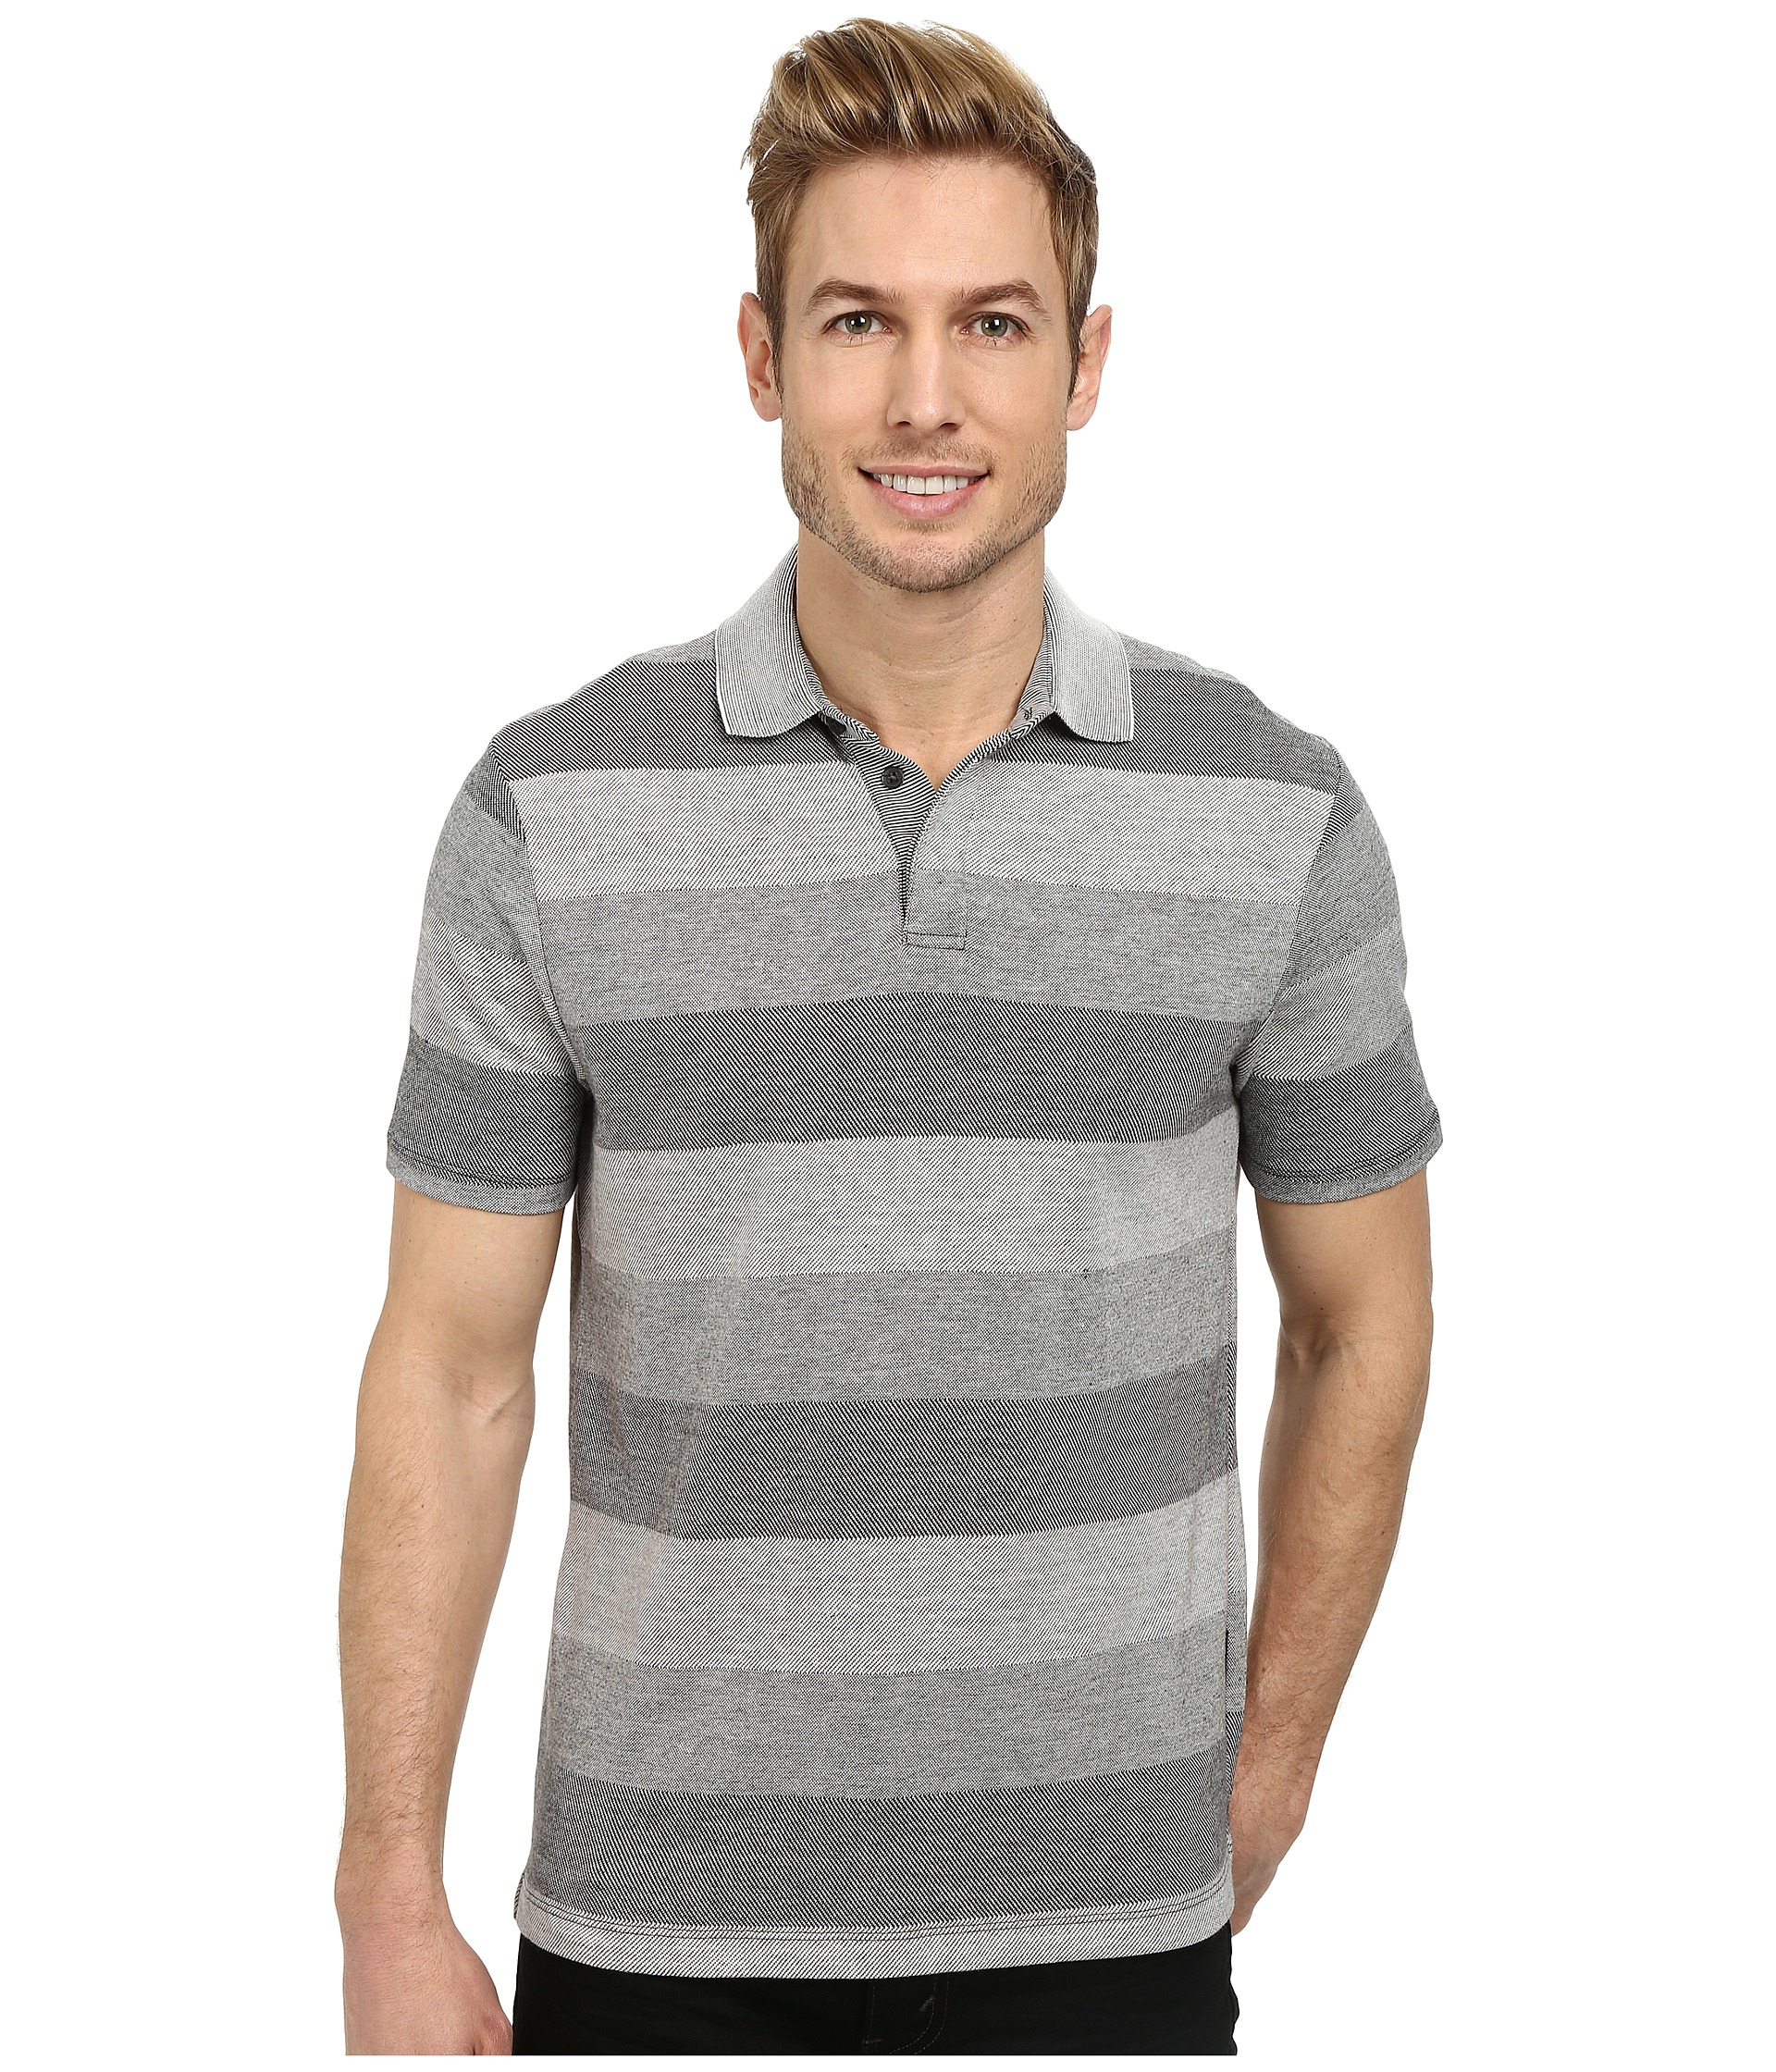 Lyst - Perry Ellis Textured Stripe Polo in Blue for Men